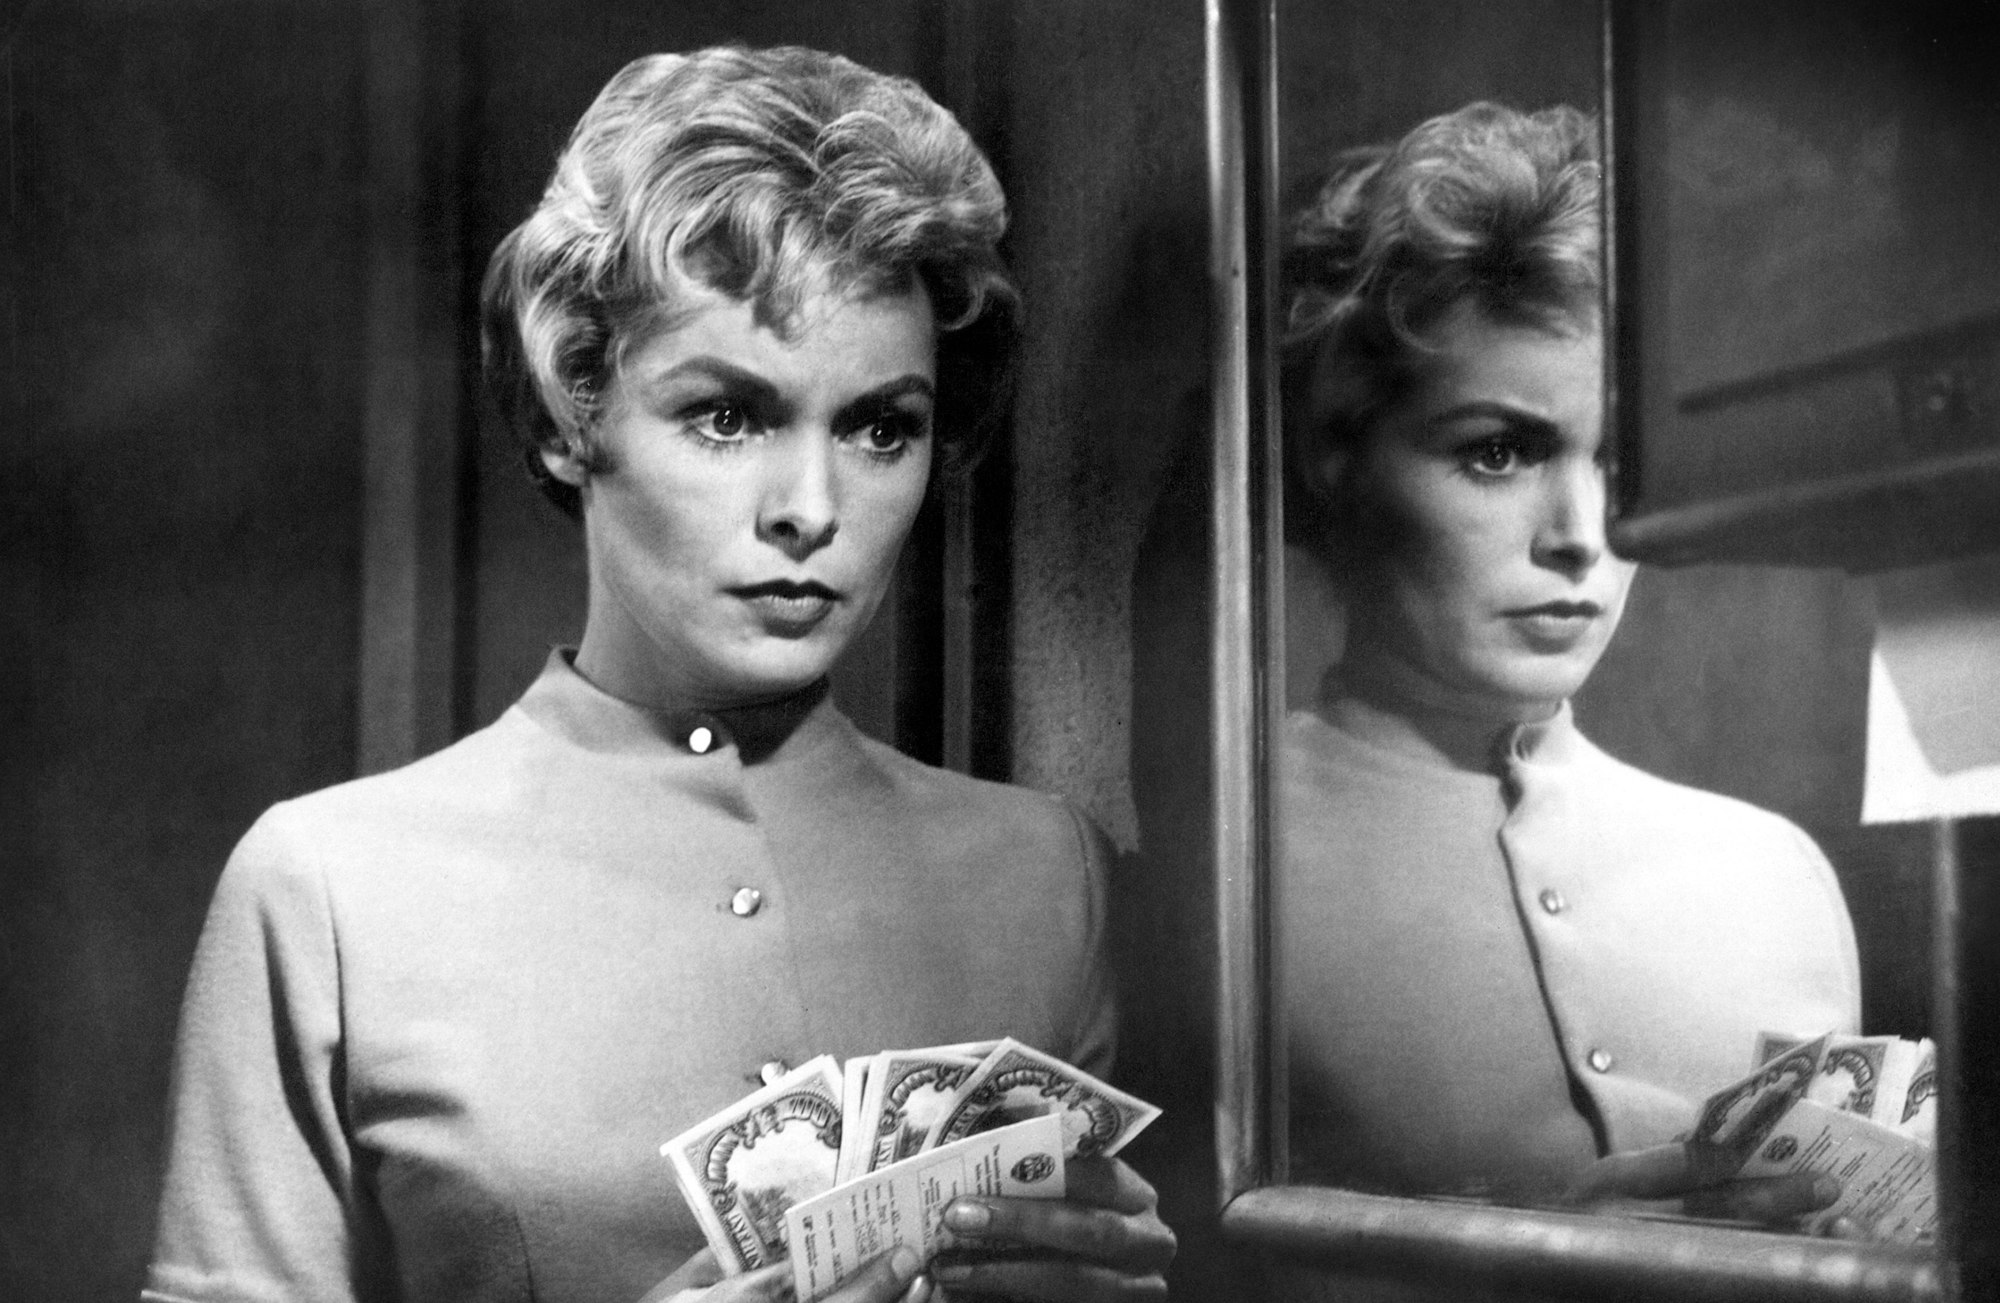 Still from Psycho 1960, photo: courtesy of Universal Pictures